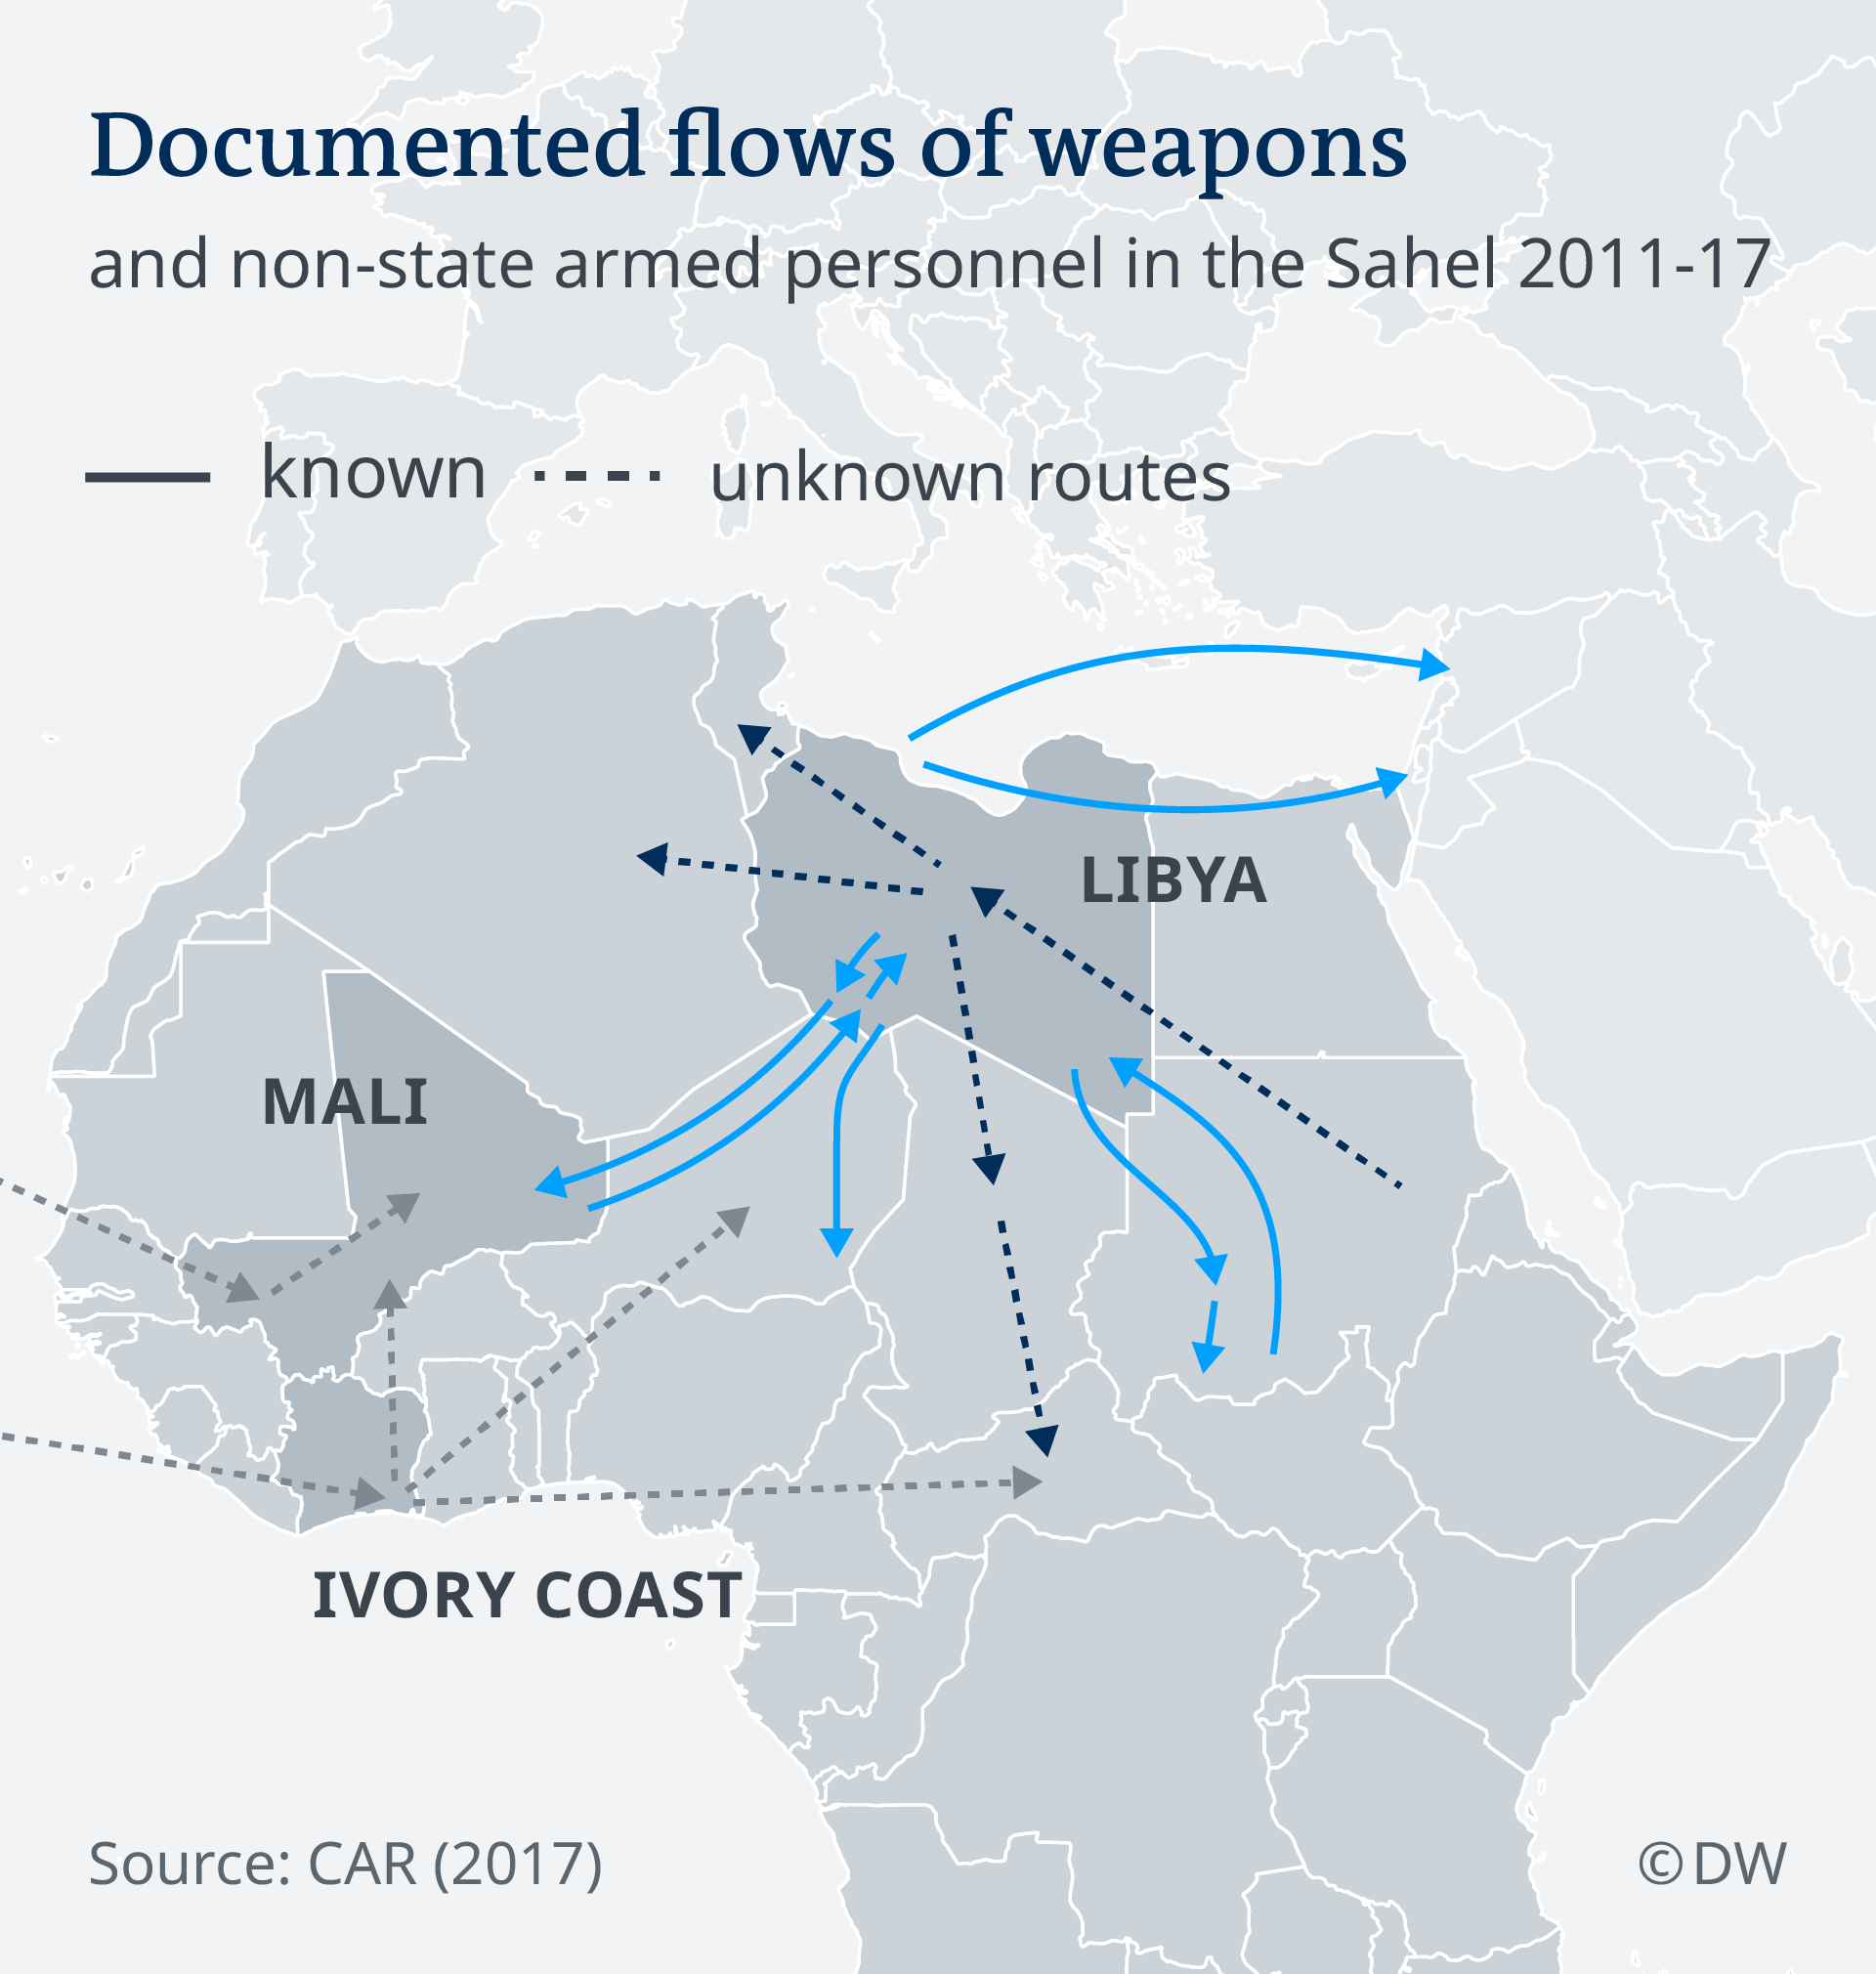 An infographic showing the documented flows of weapons across the Sahel in Africa